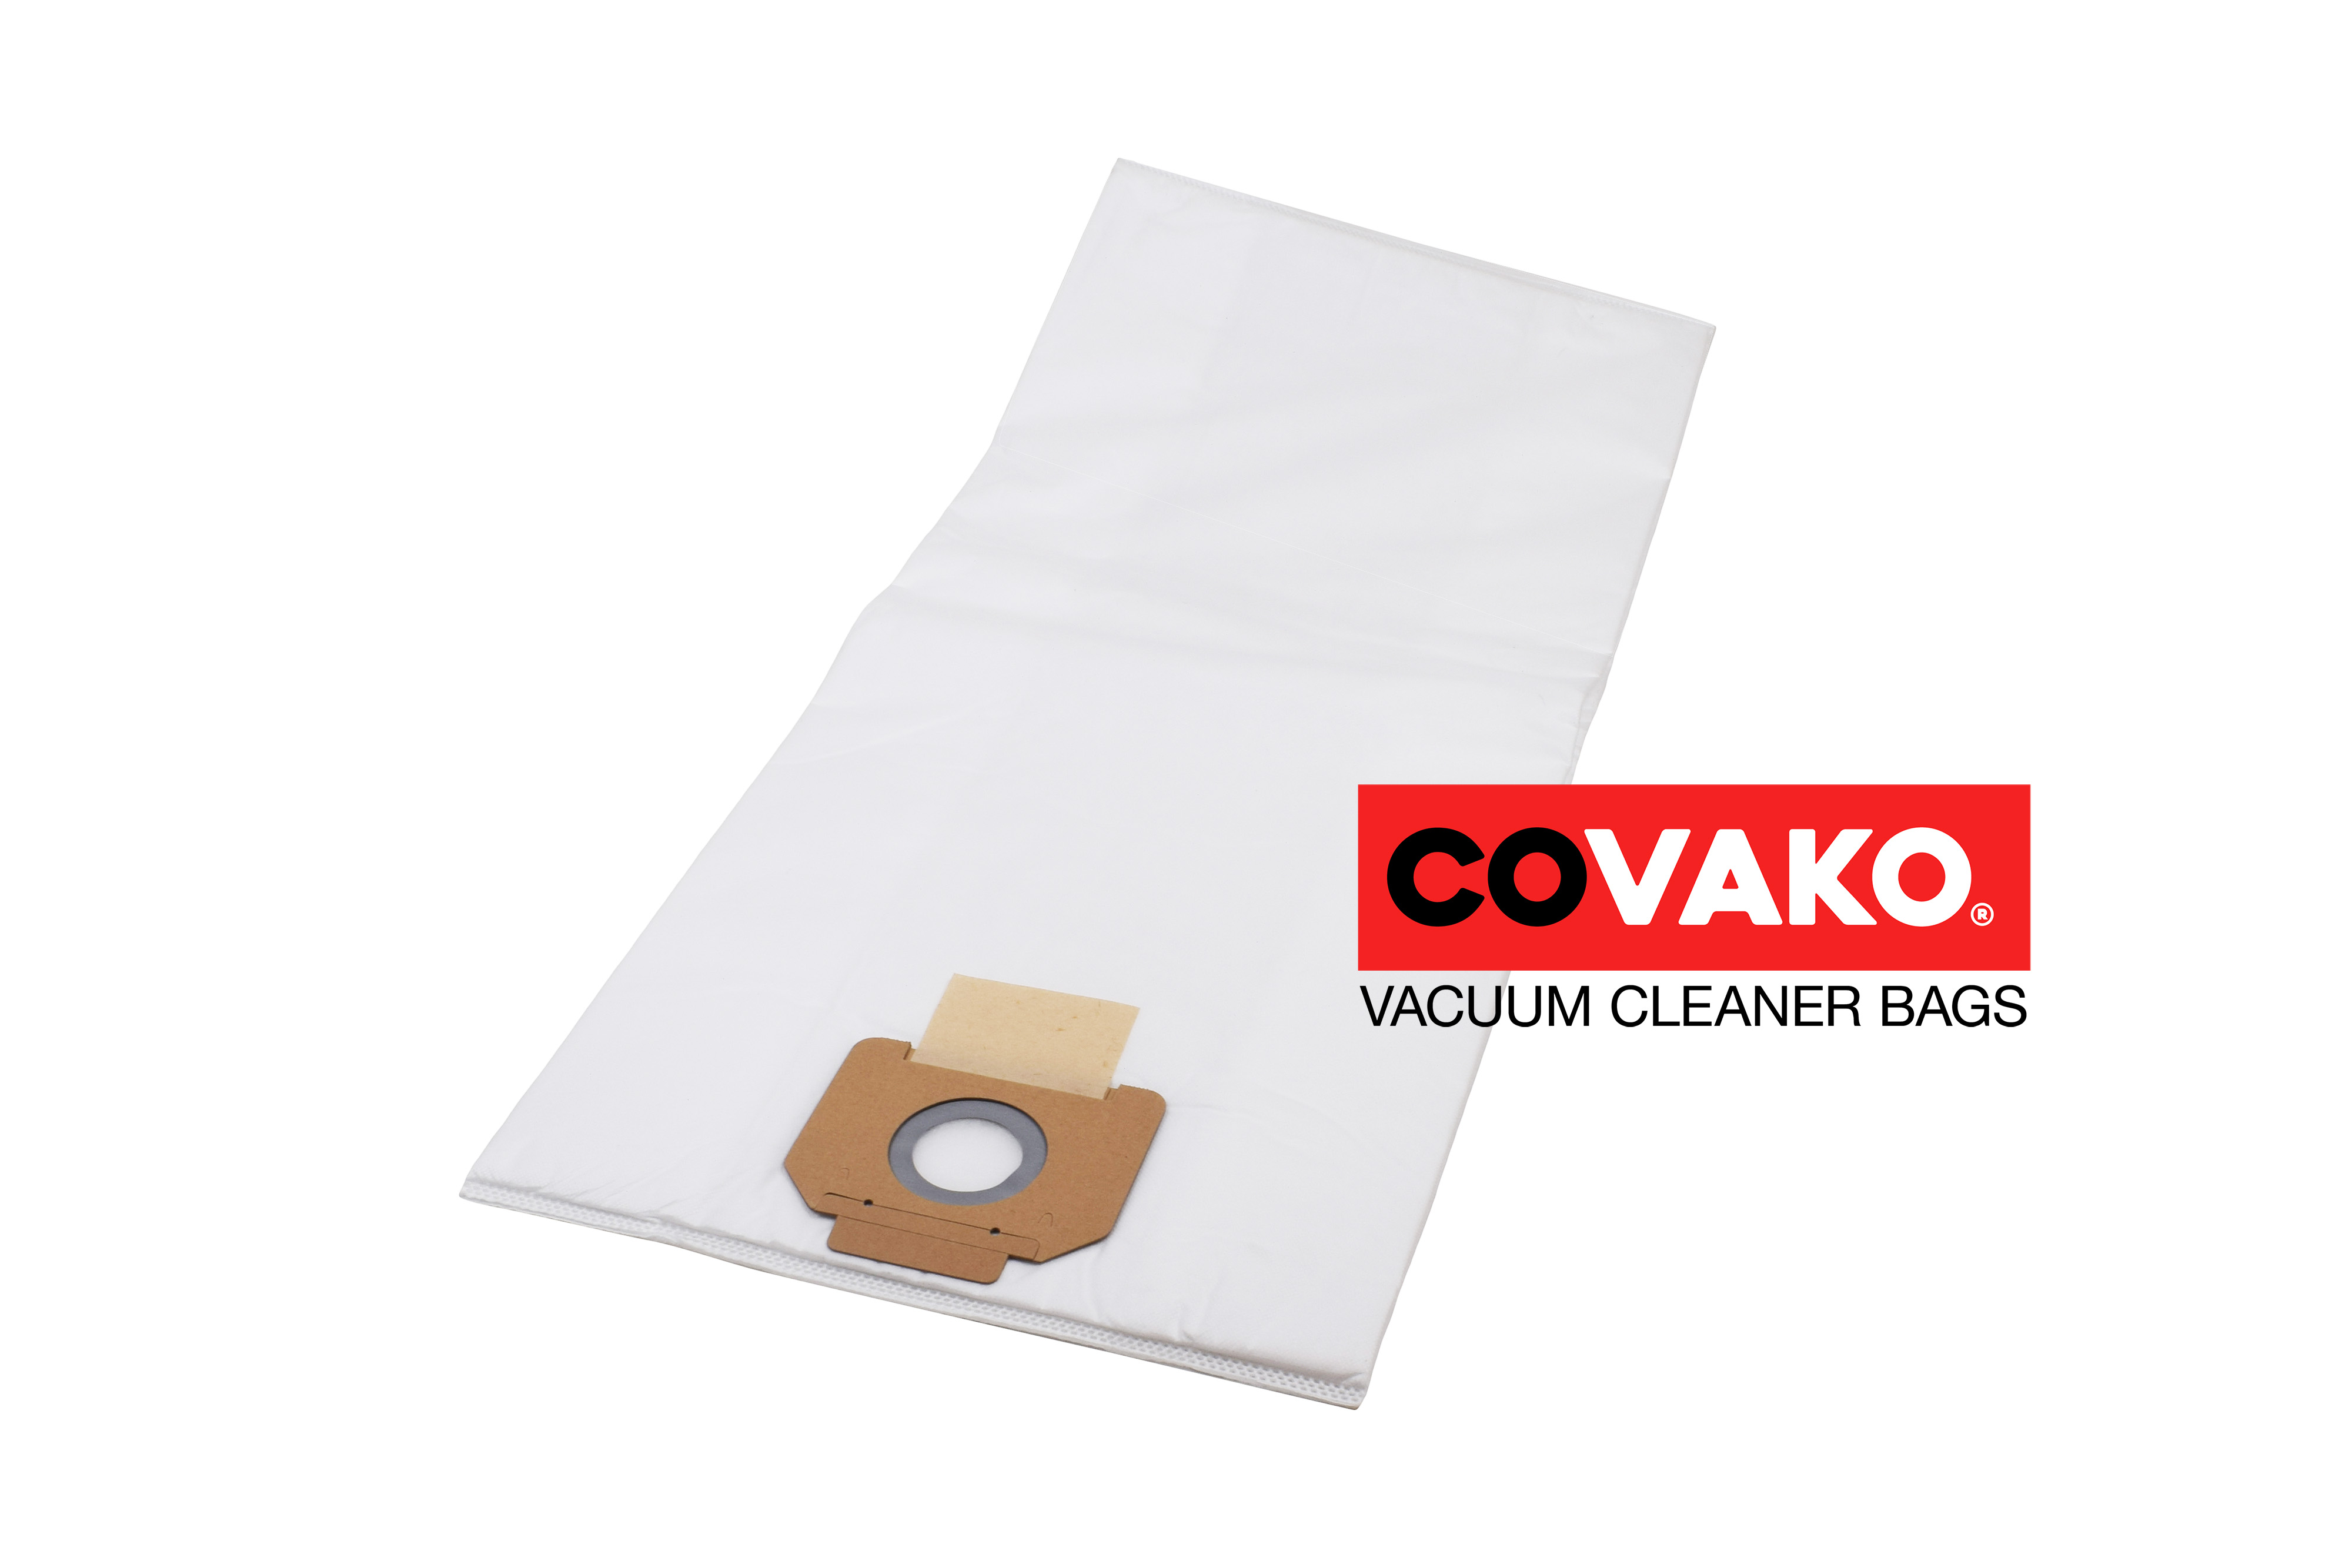 Tennant V 14 / Synthesis - Tennant vacuum cleaner bags